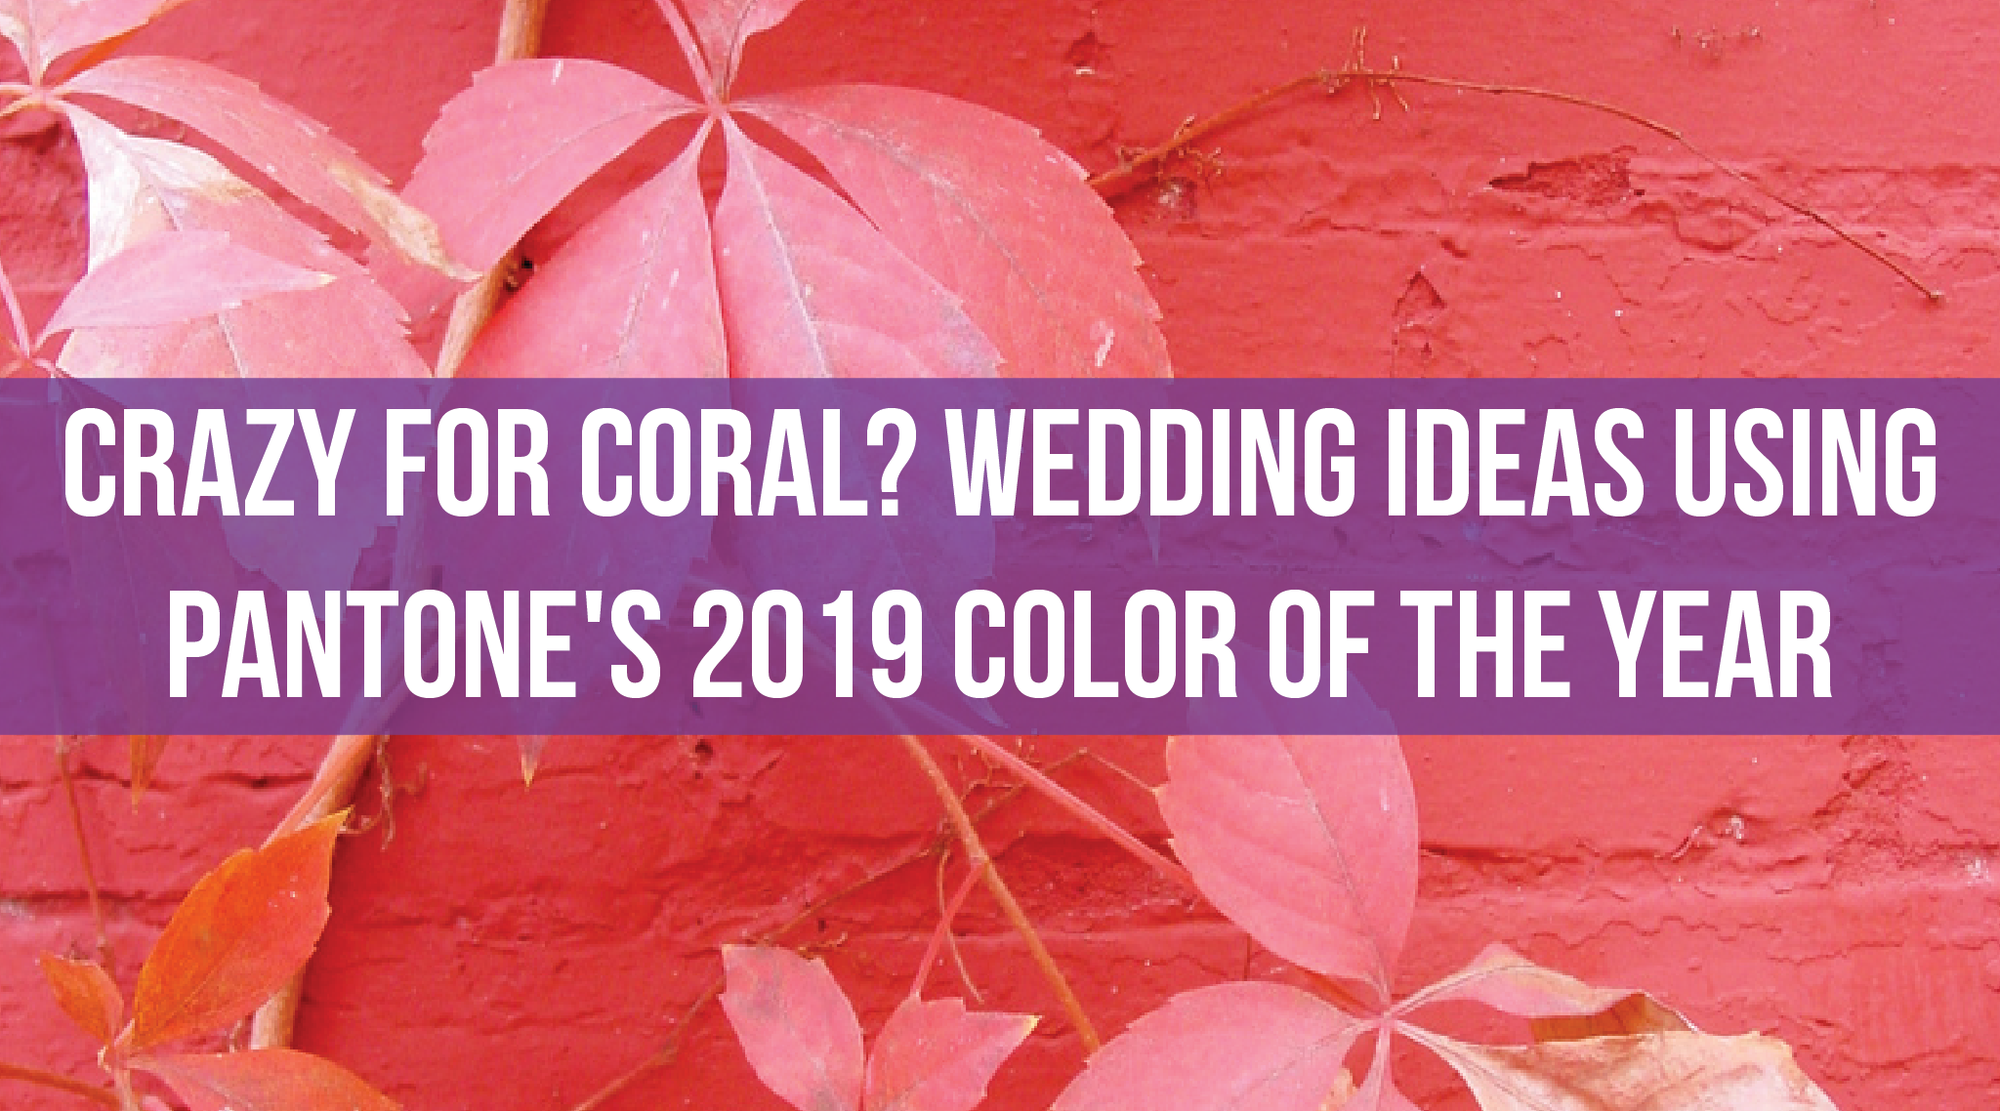 Crazy for Coral? Wedding Ideas Using Pantone's 2019 Color of the Year